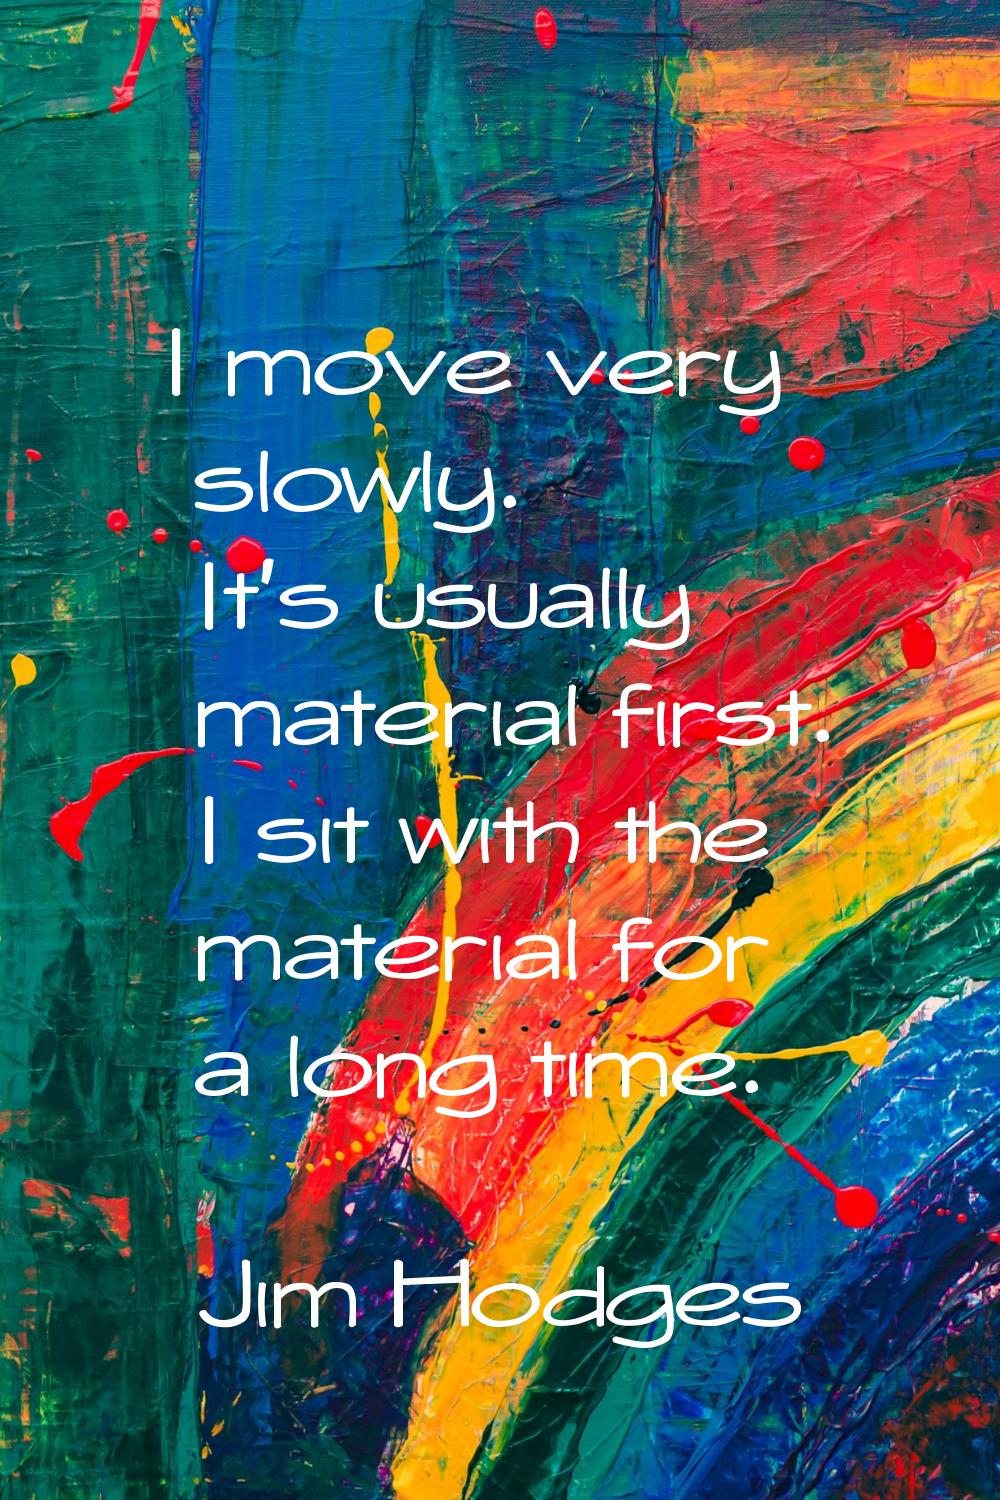 I move very slowly. It's usually material first. I sit with the material for a long time.